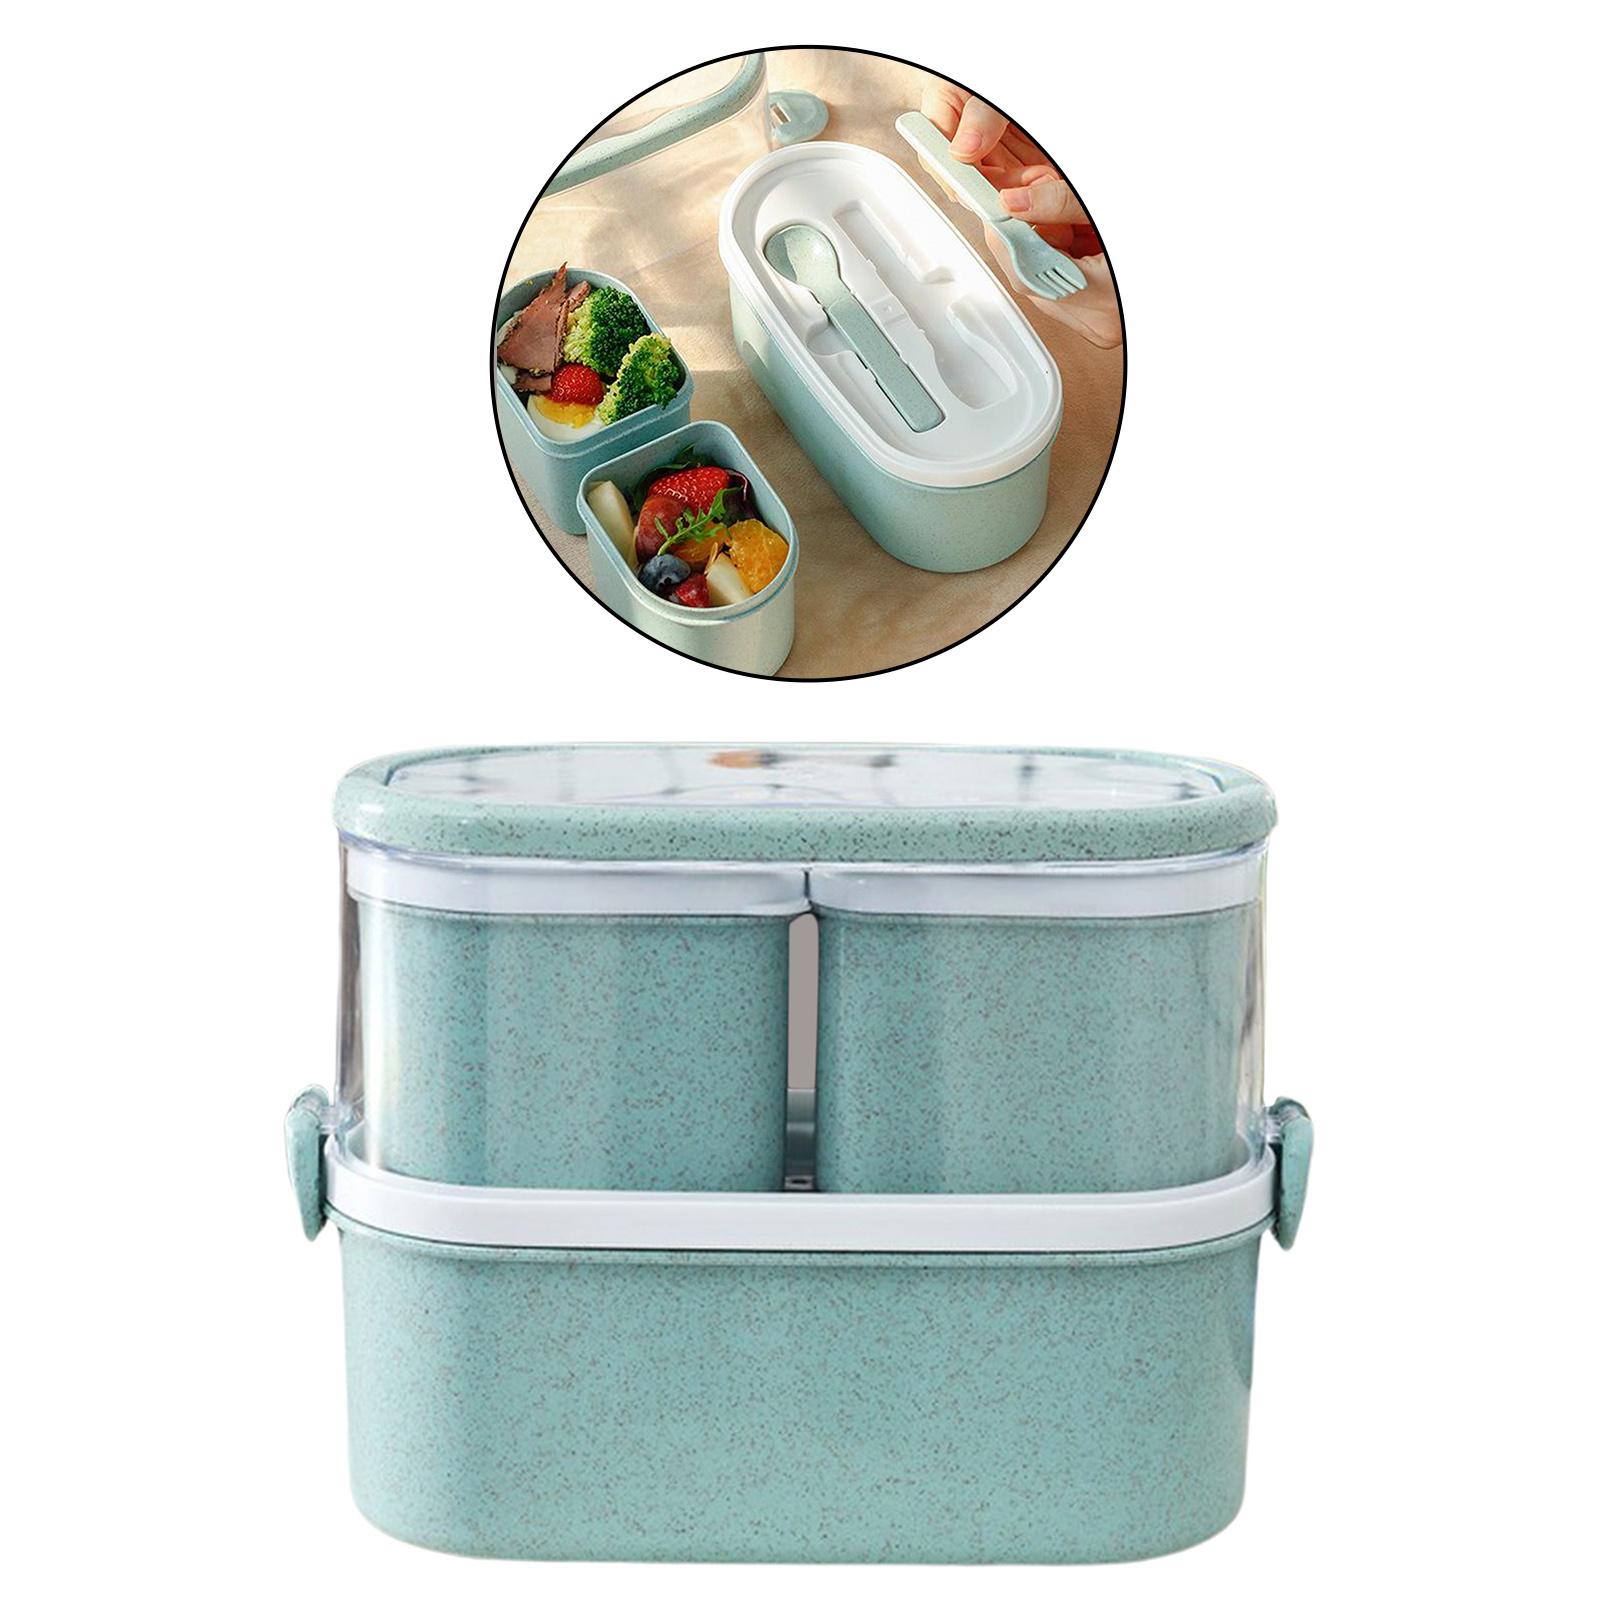 Reusable Lunch Box Sandwich Salad Fruit Food Box Storage Container with Spoon Fork